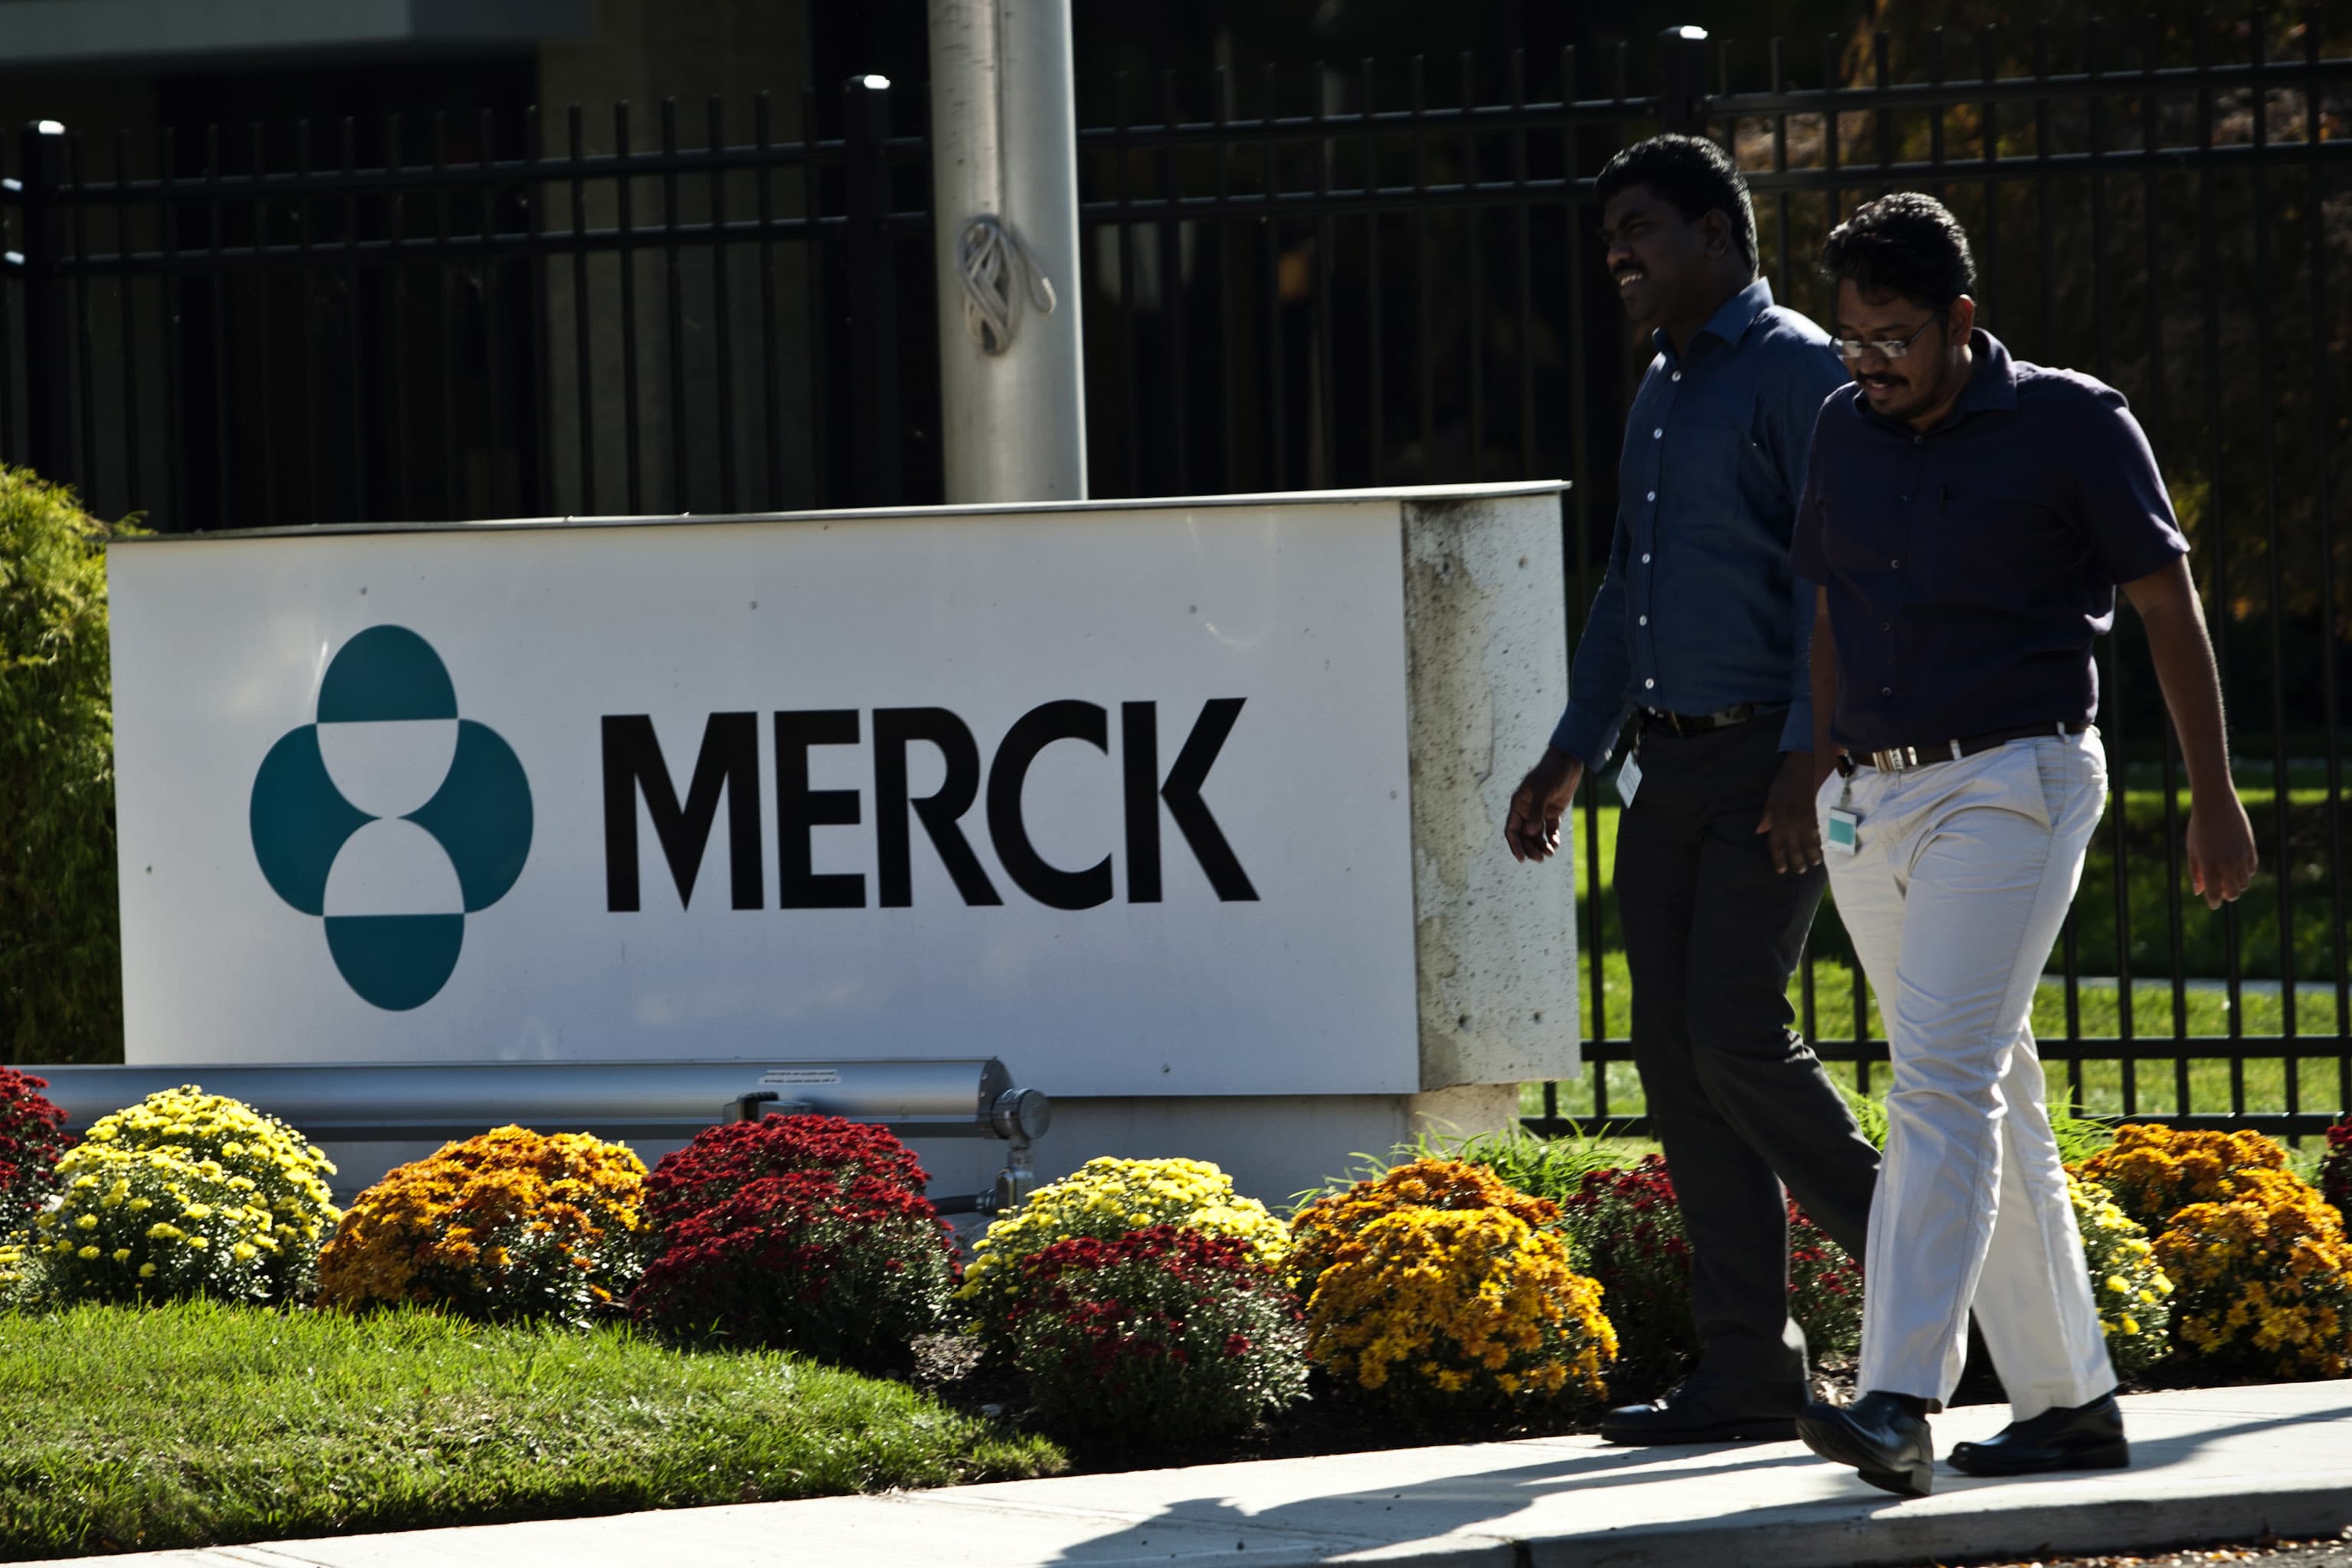 Merck, Lordstown Motors, Coty, Zoom and others